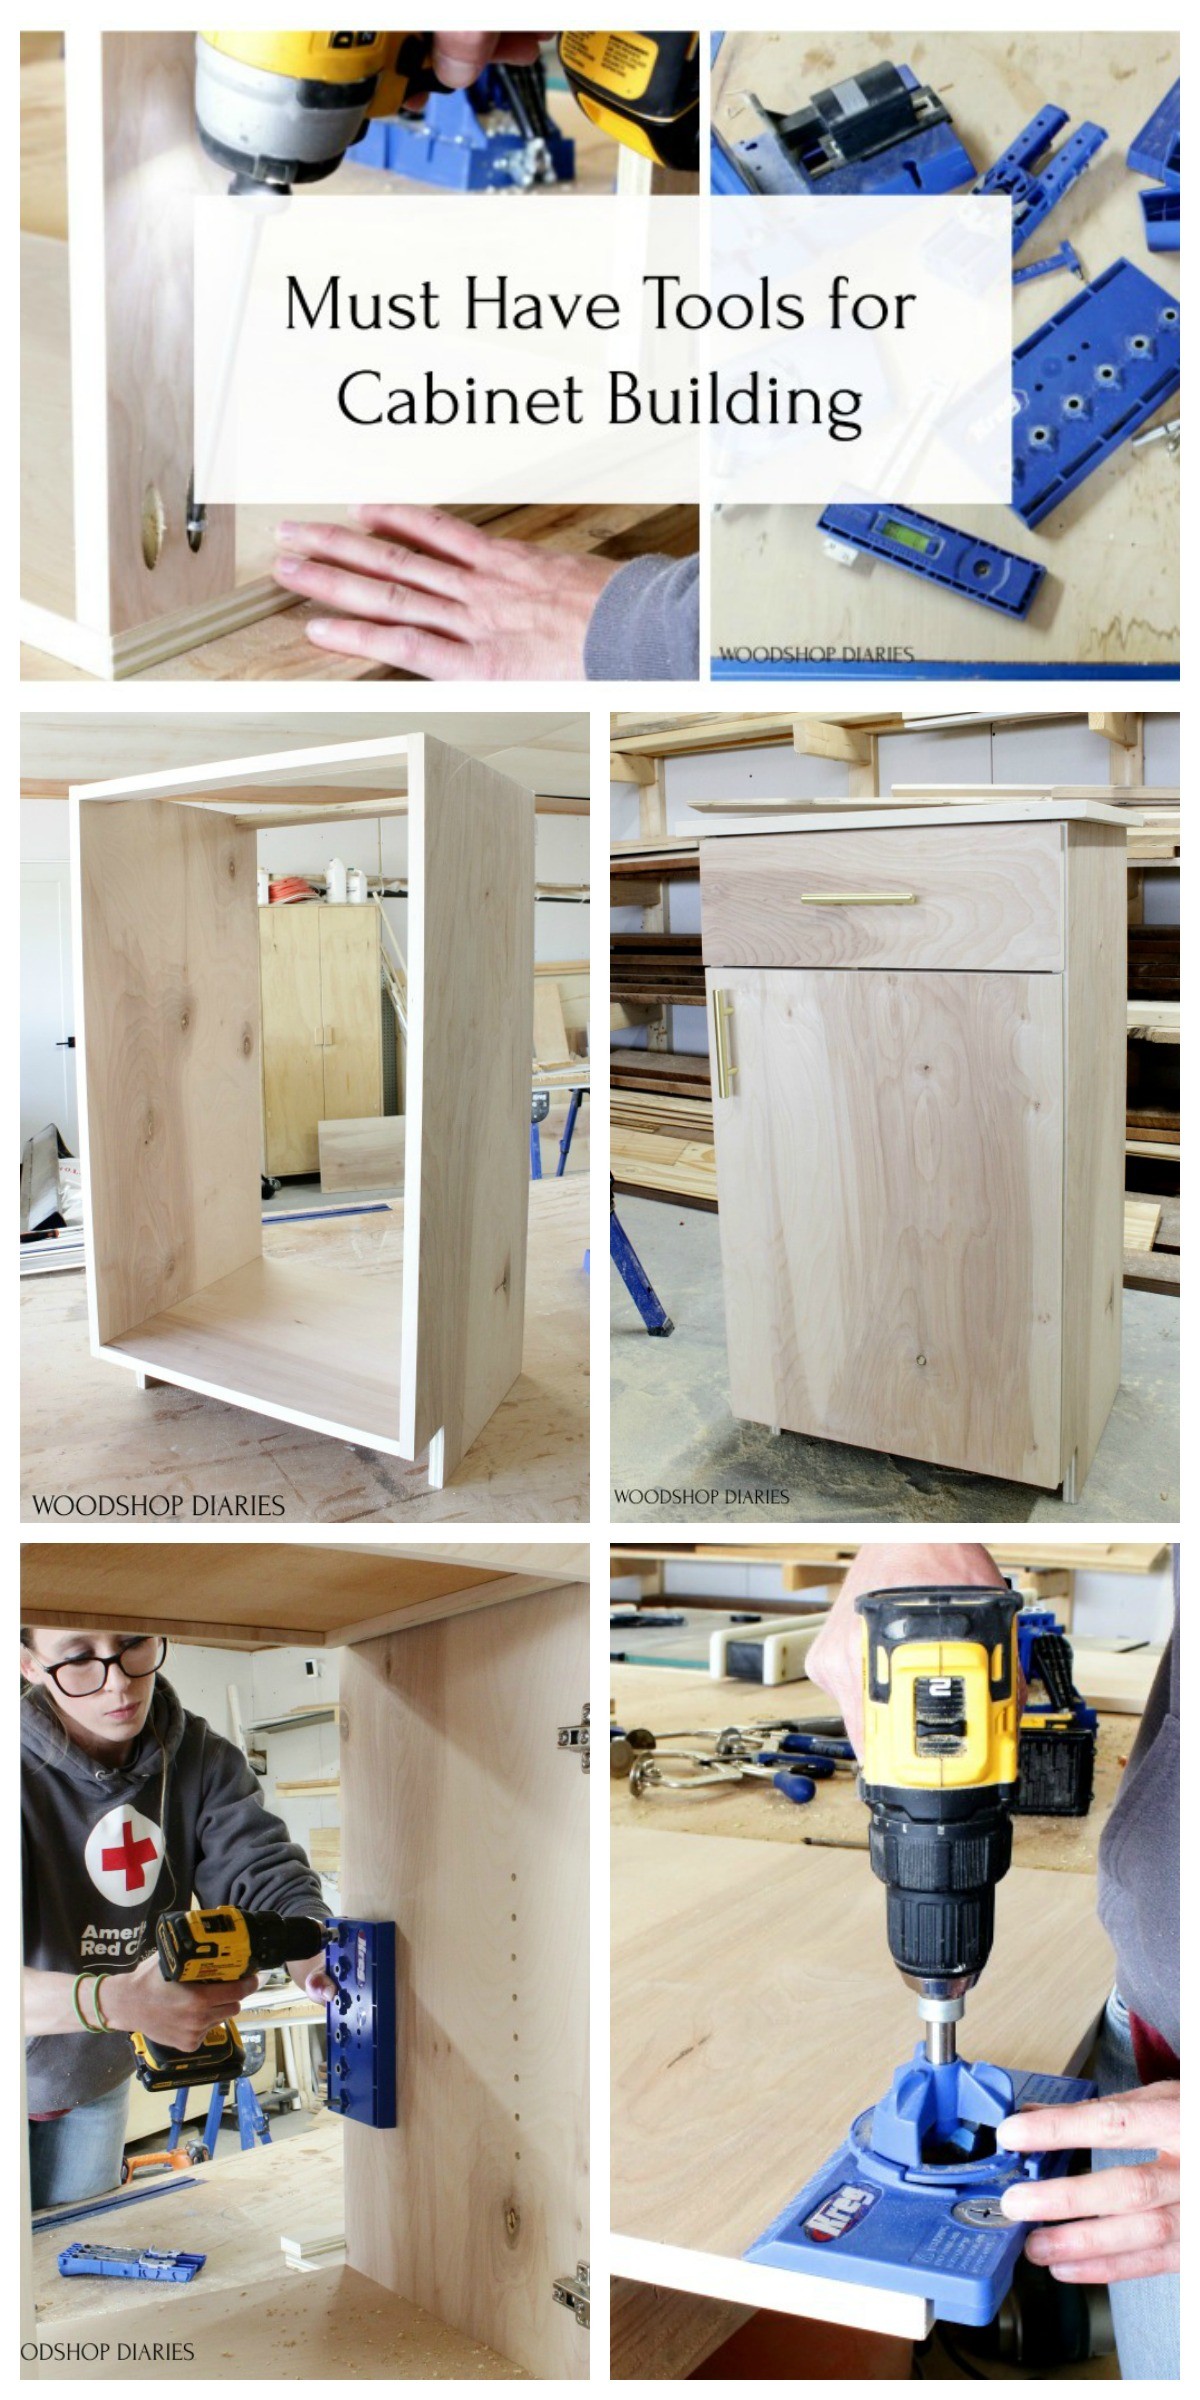 Must have tools for cabinet building pin image collage